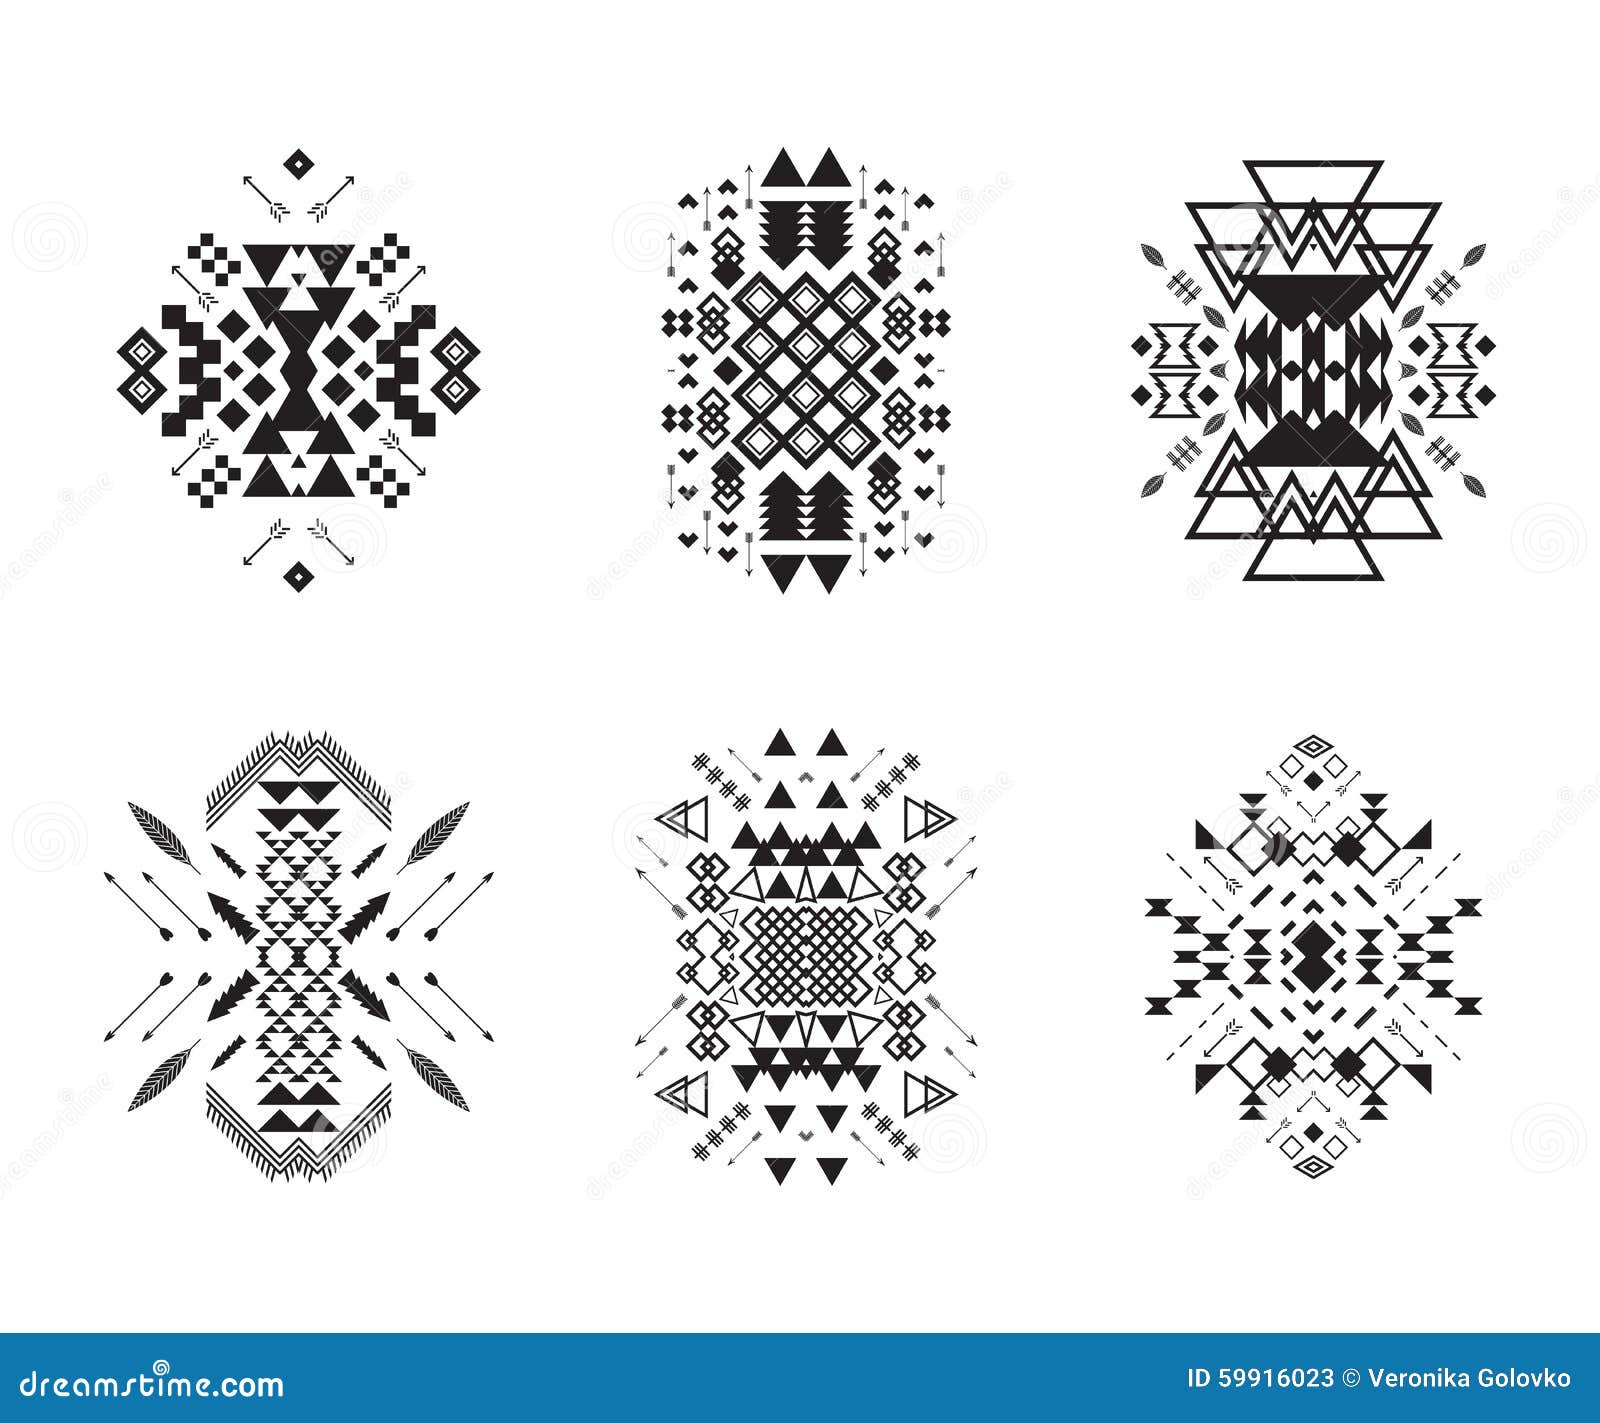 Tribal elements collection stock vector. Illustration of graphic - 59916023